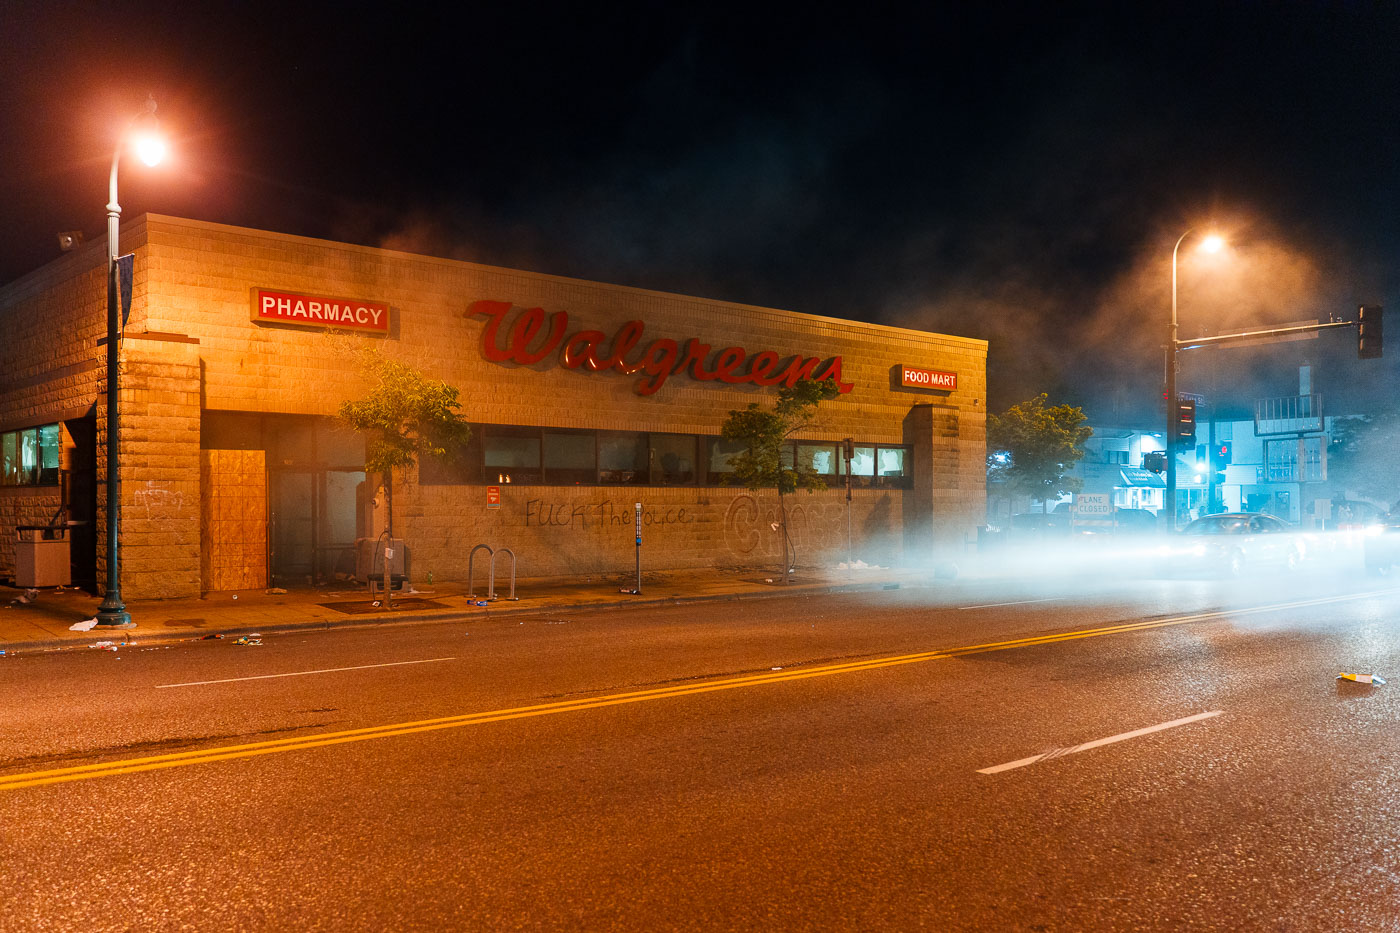 Walgreens store on fire